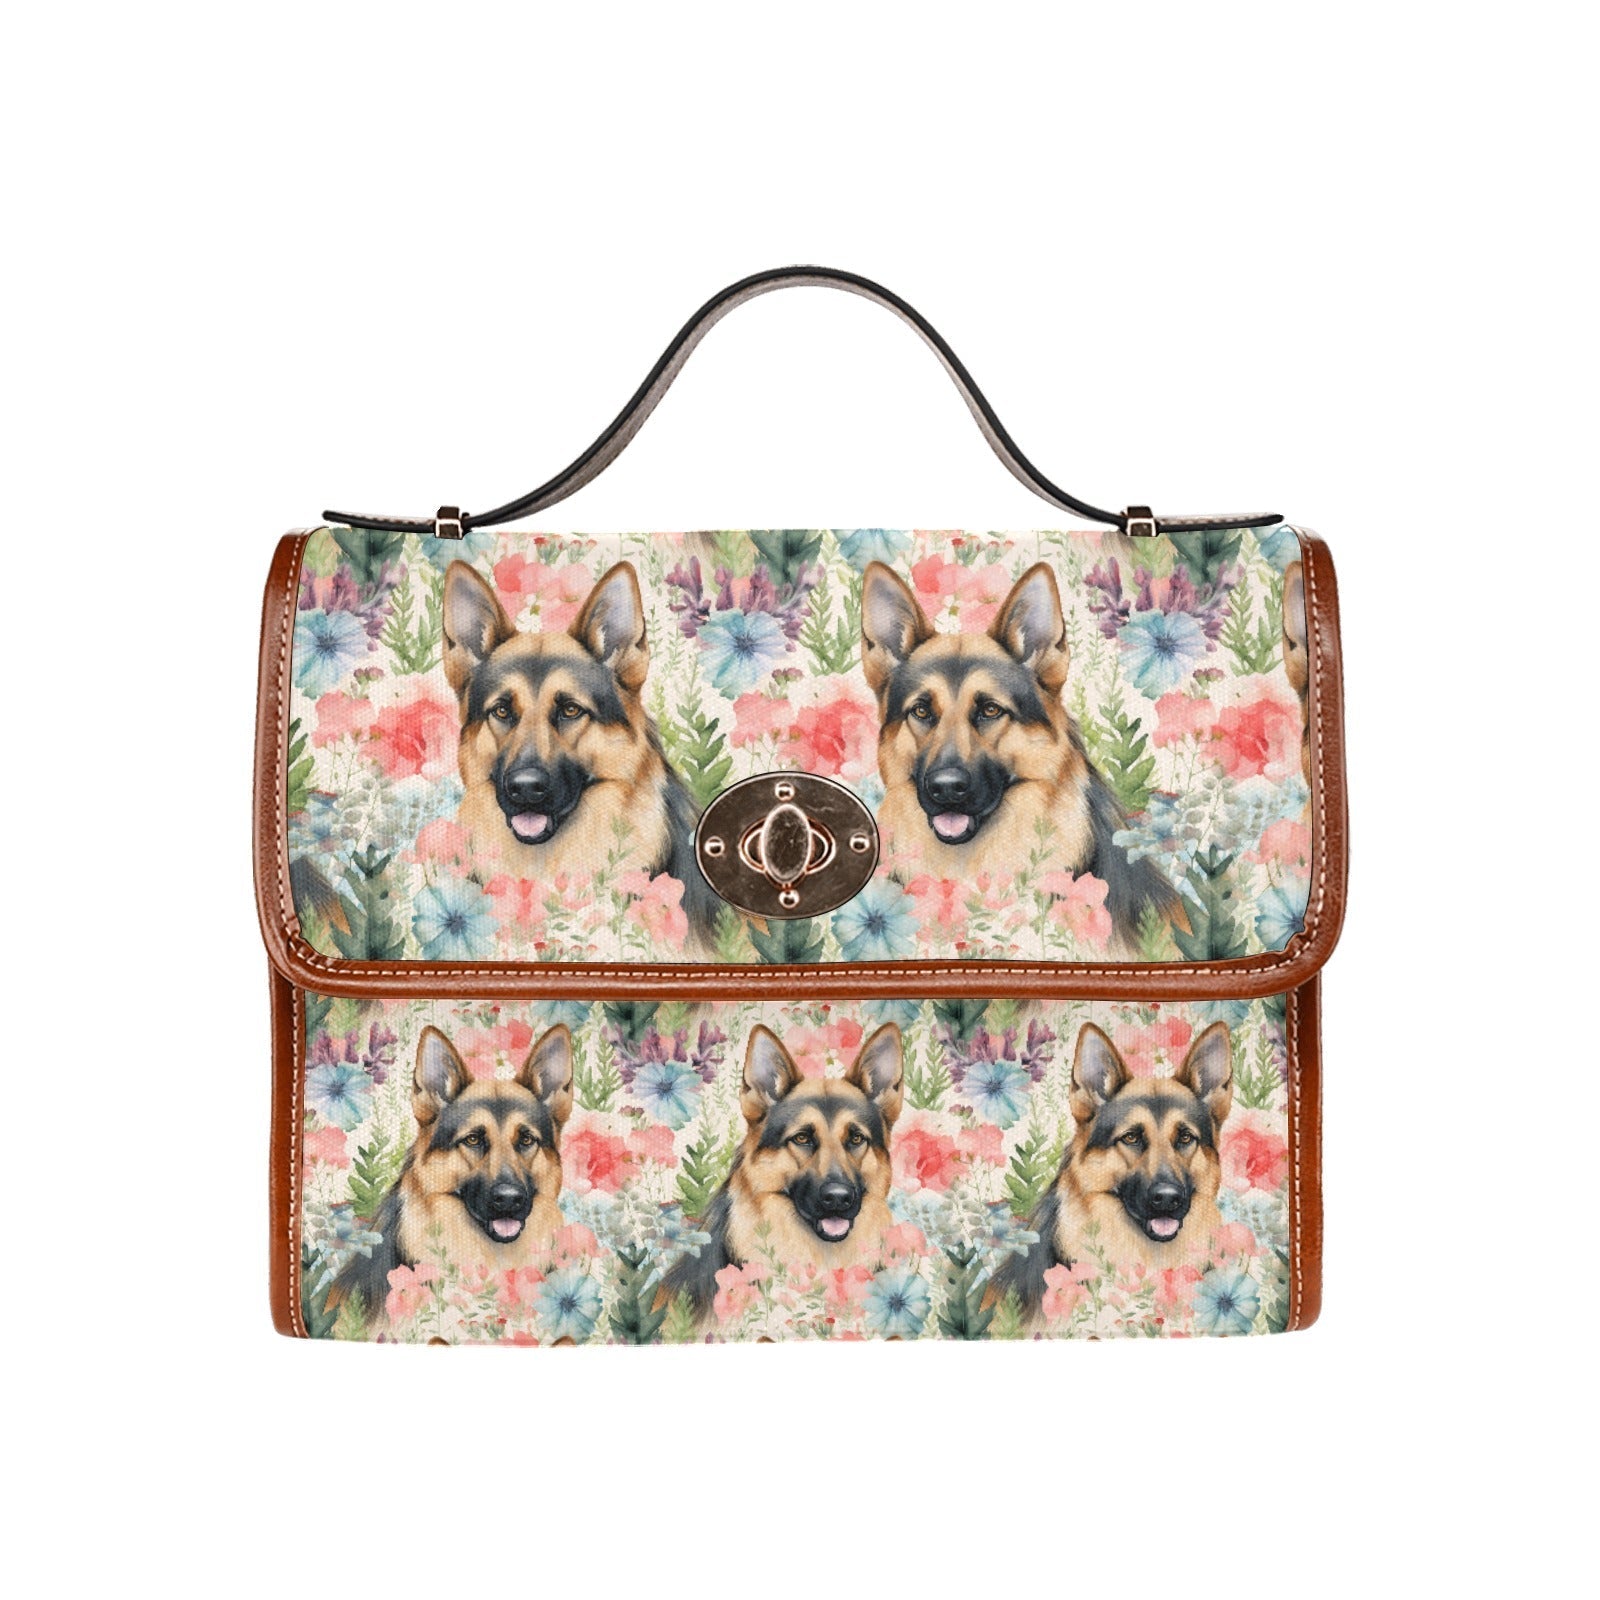 German Shepherd Coin Purse Pouch Available at SaltyPaws.com